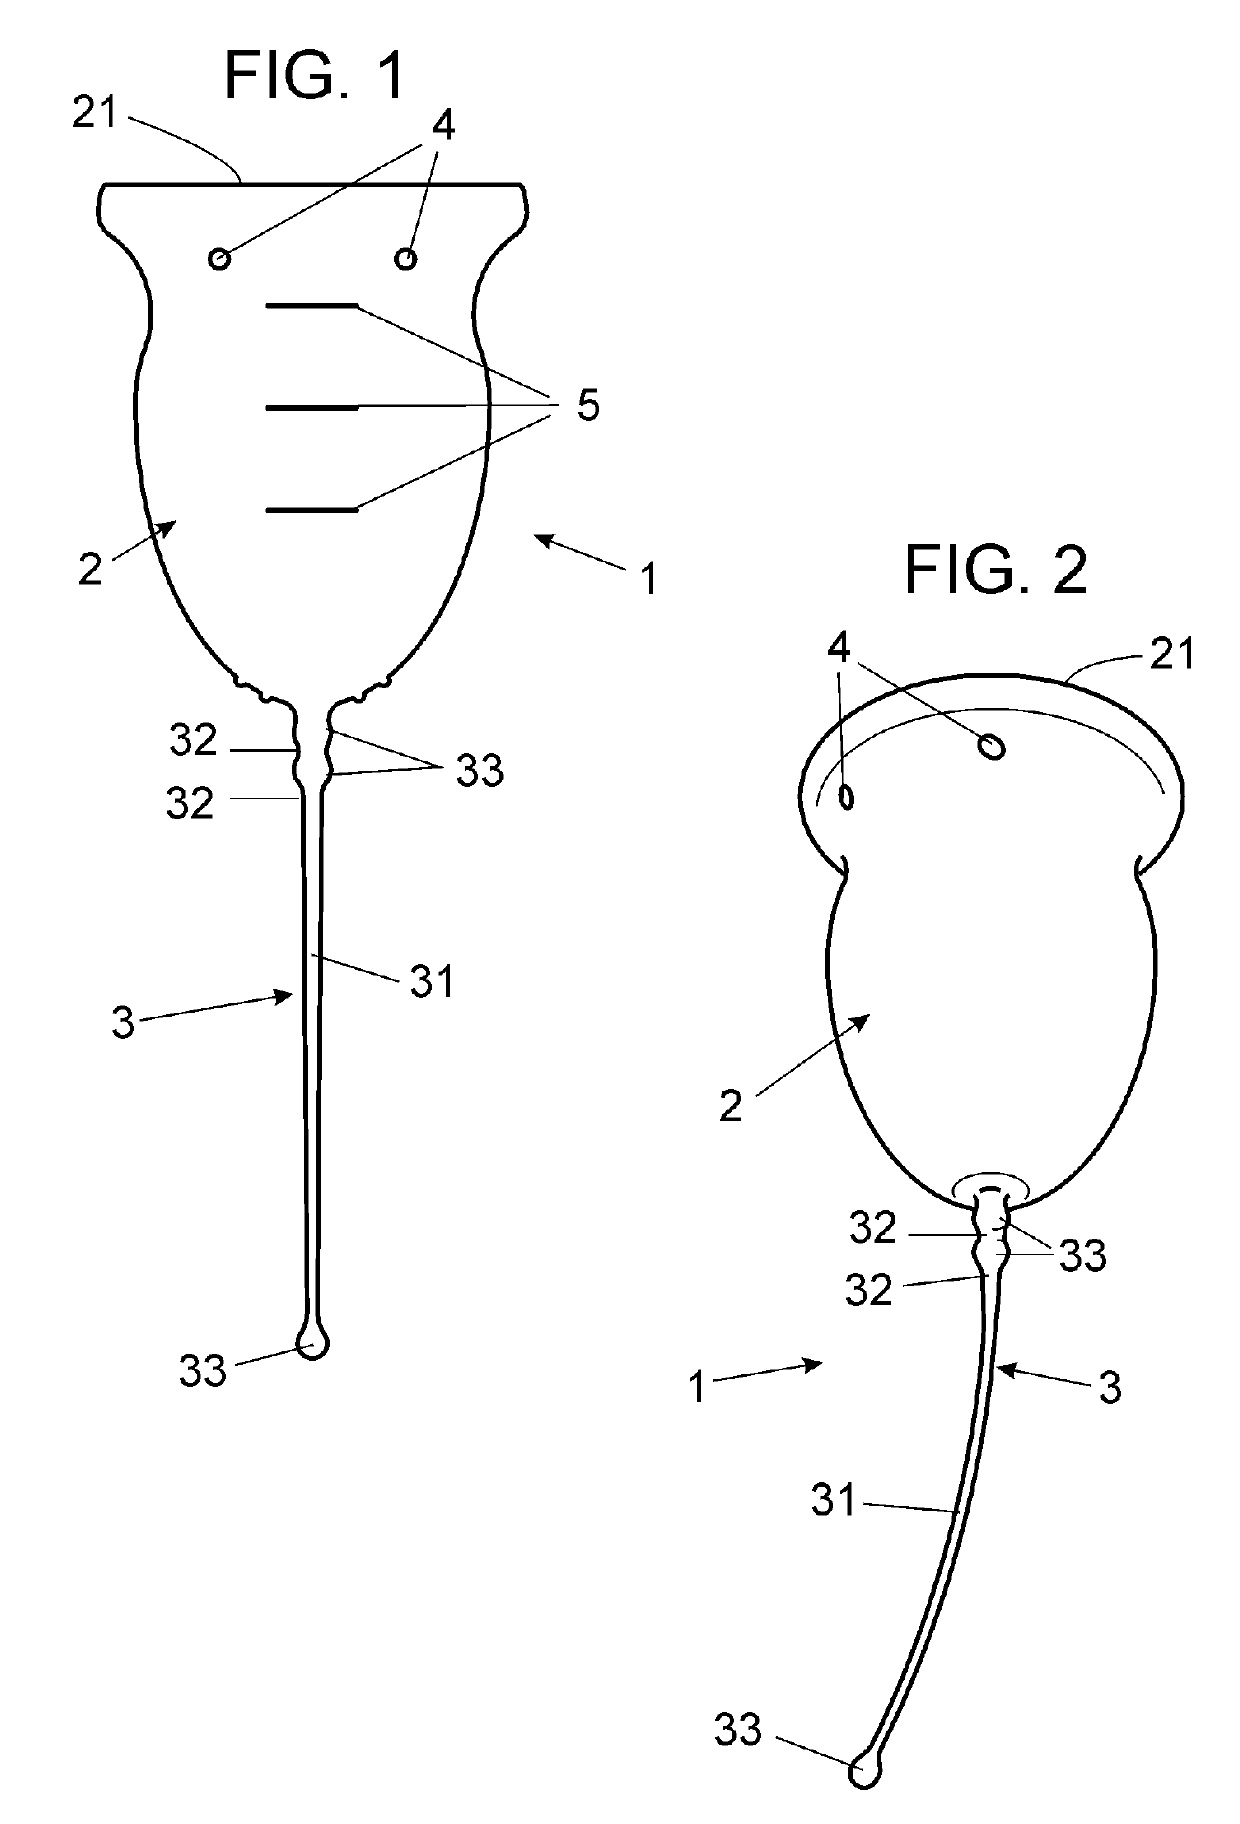 Hygienic device for the collection of menstrual flow